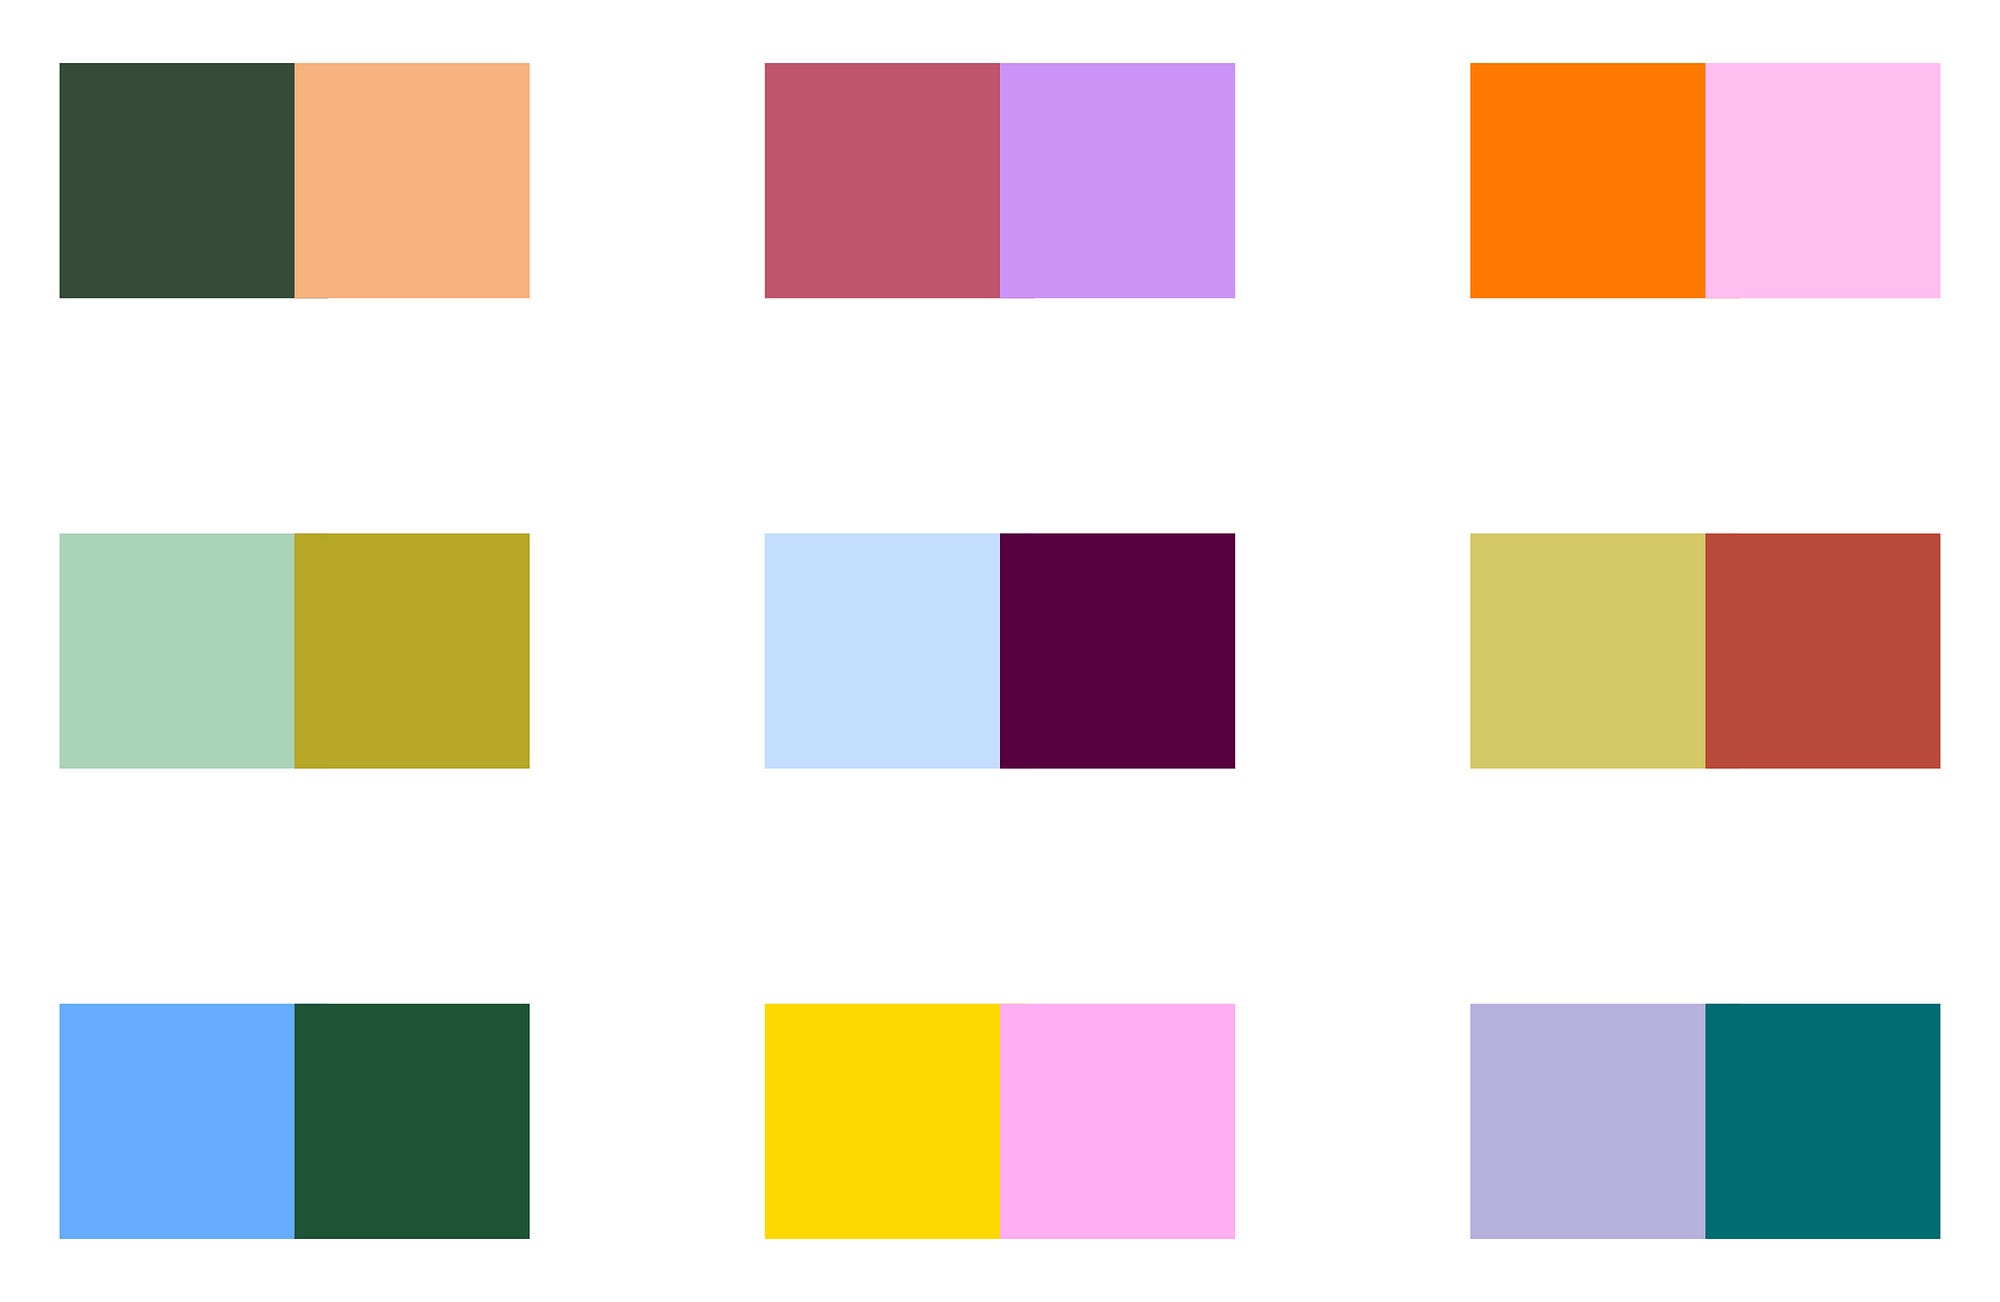 Halfway color combinations. Beyond complementary and analogous